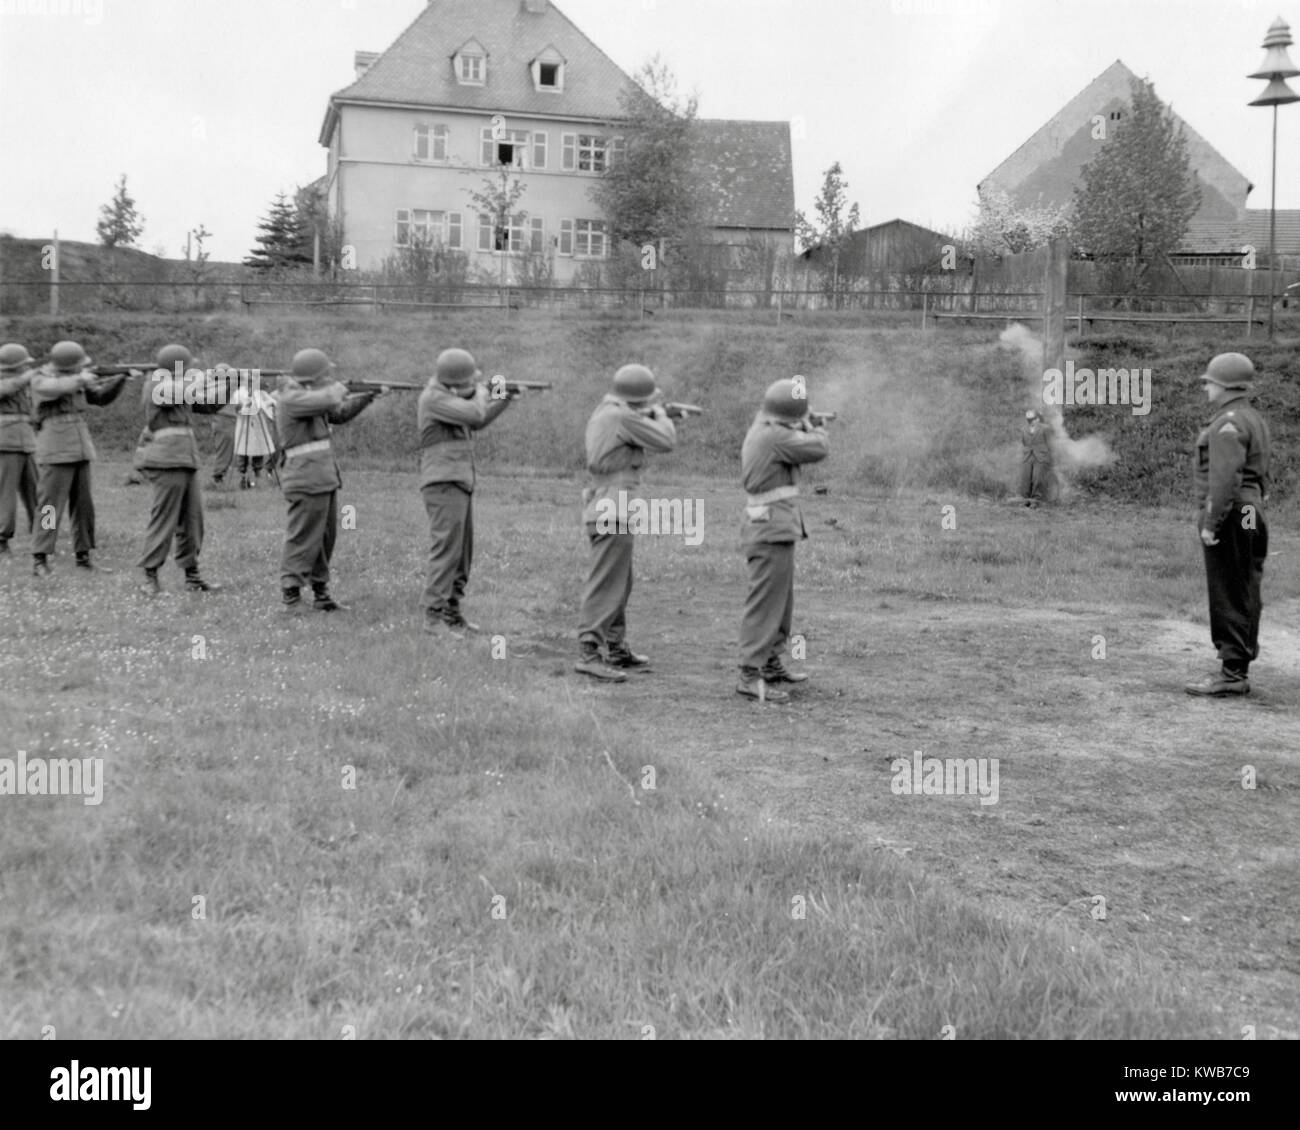 U.S. Army firing squad executed Richard Jarozik in Kitzingen, Germany, April 23, 1945. Jarozik acted as a Nazi spy behind the front lines of the U.S. 7th Army, sabotaging equipment and killing U.S. soldiers. World War 2. (BSLOC 2014 8 102) Stock Photo